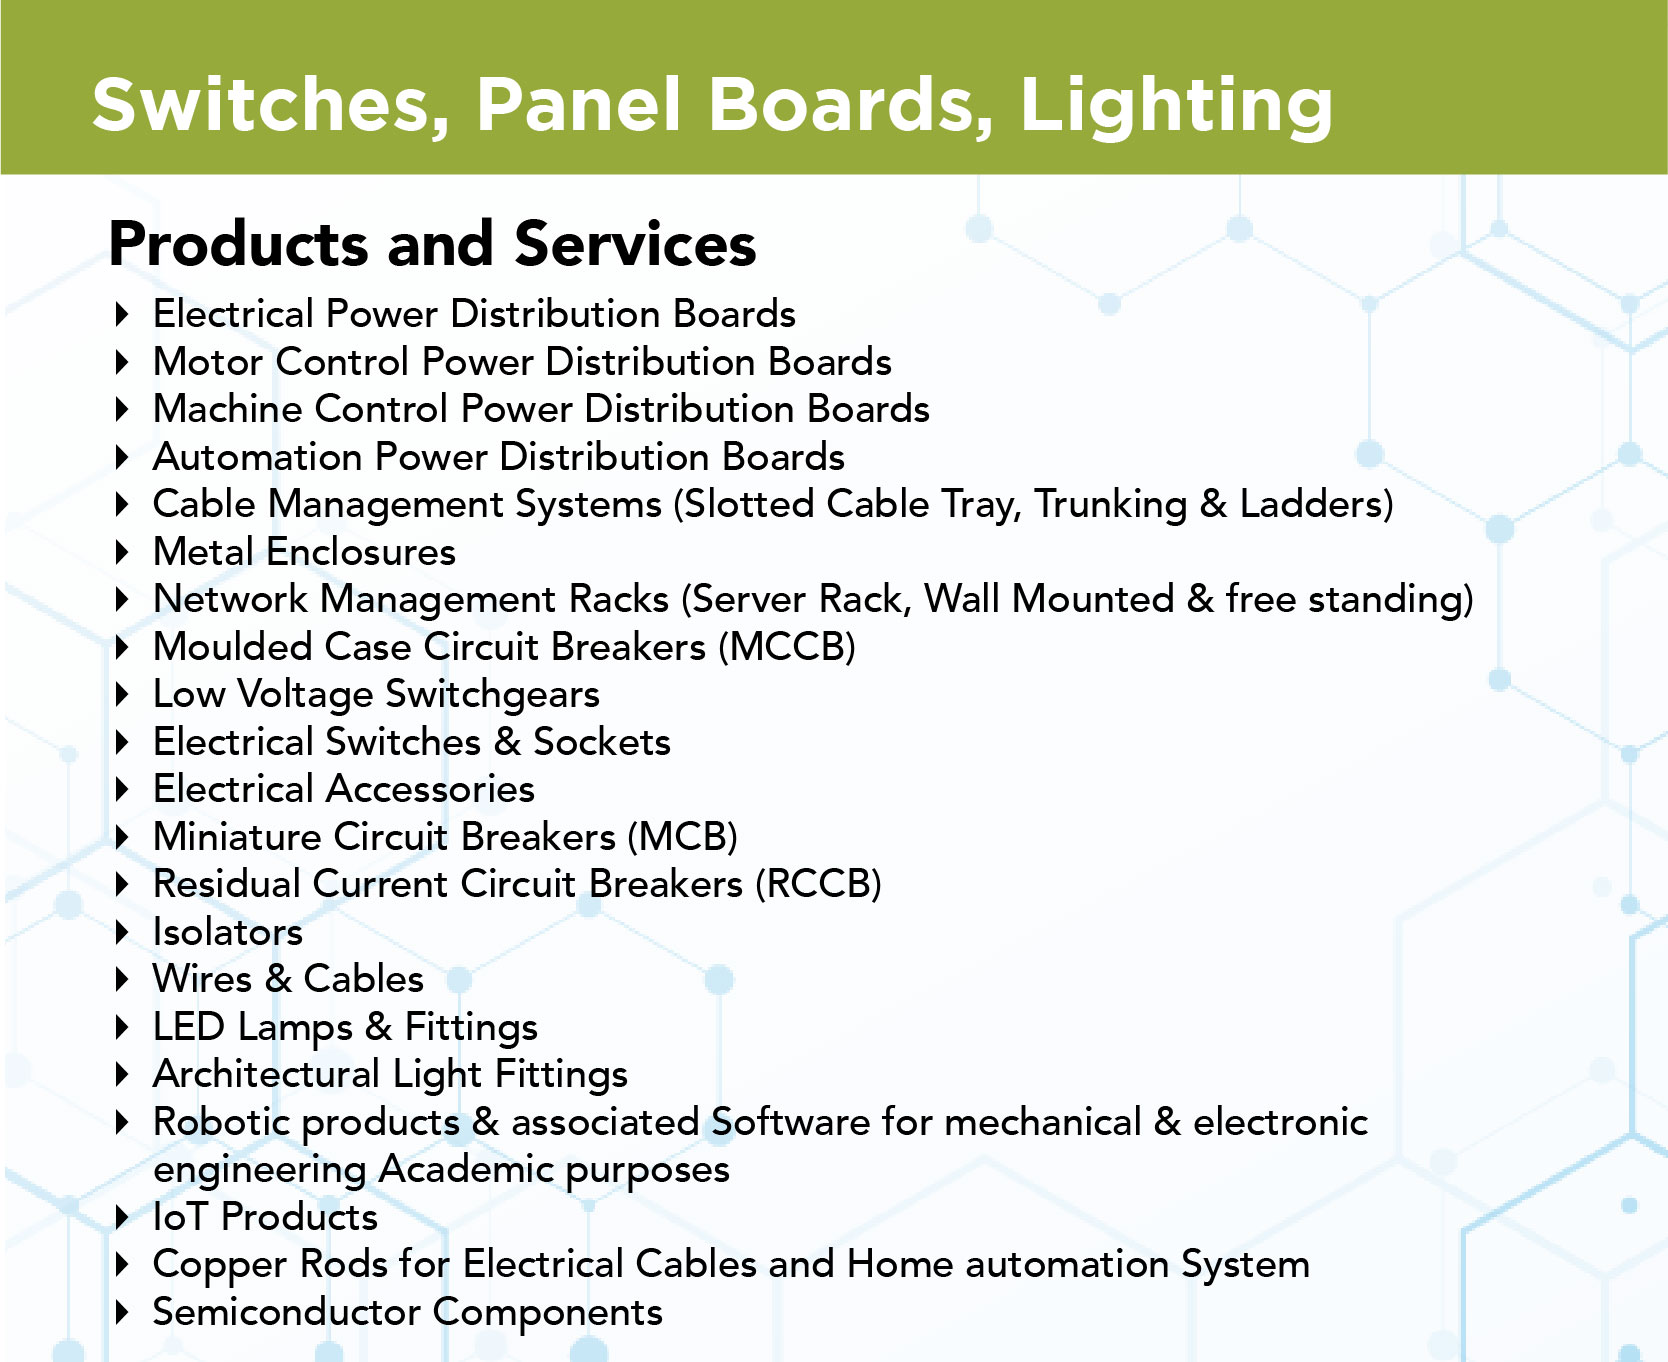 Switches, Panel Boards, Lighting